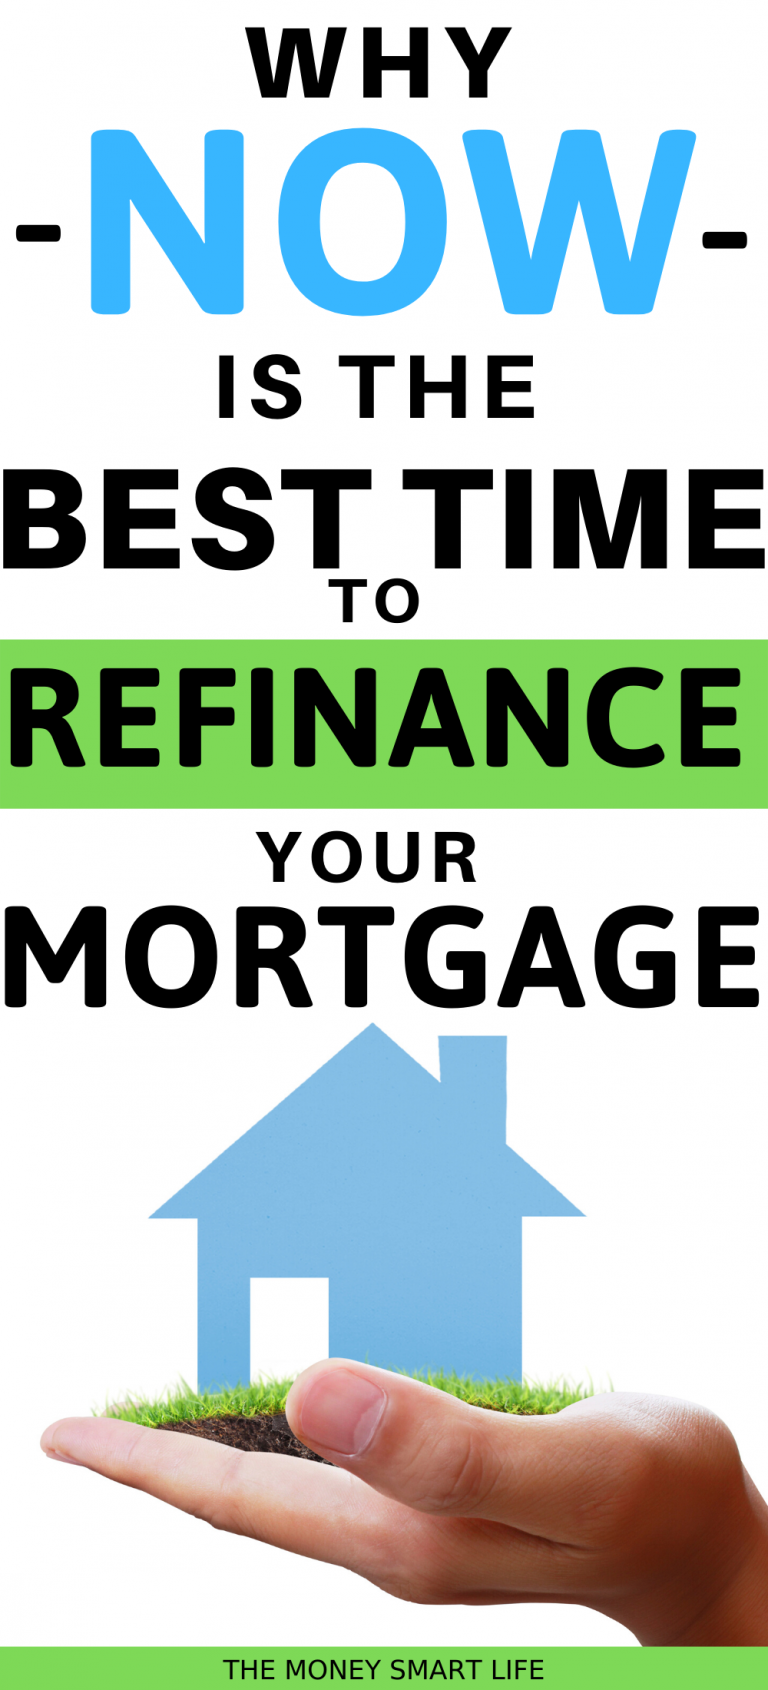 Why Now is the Time To Buy A New Home or Refinance Your Loan